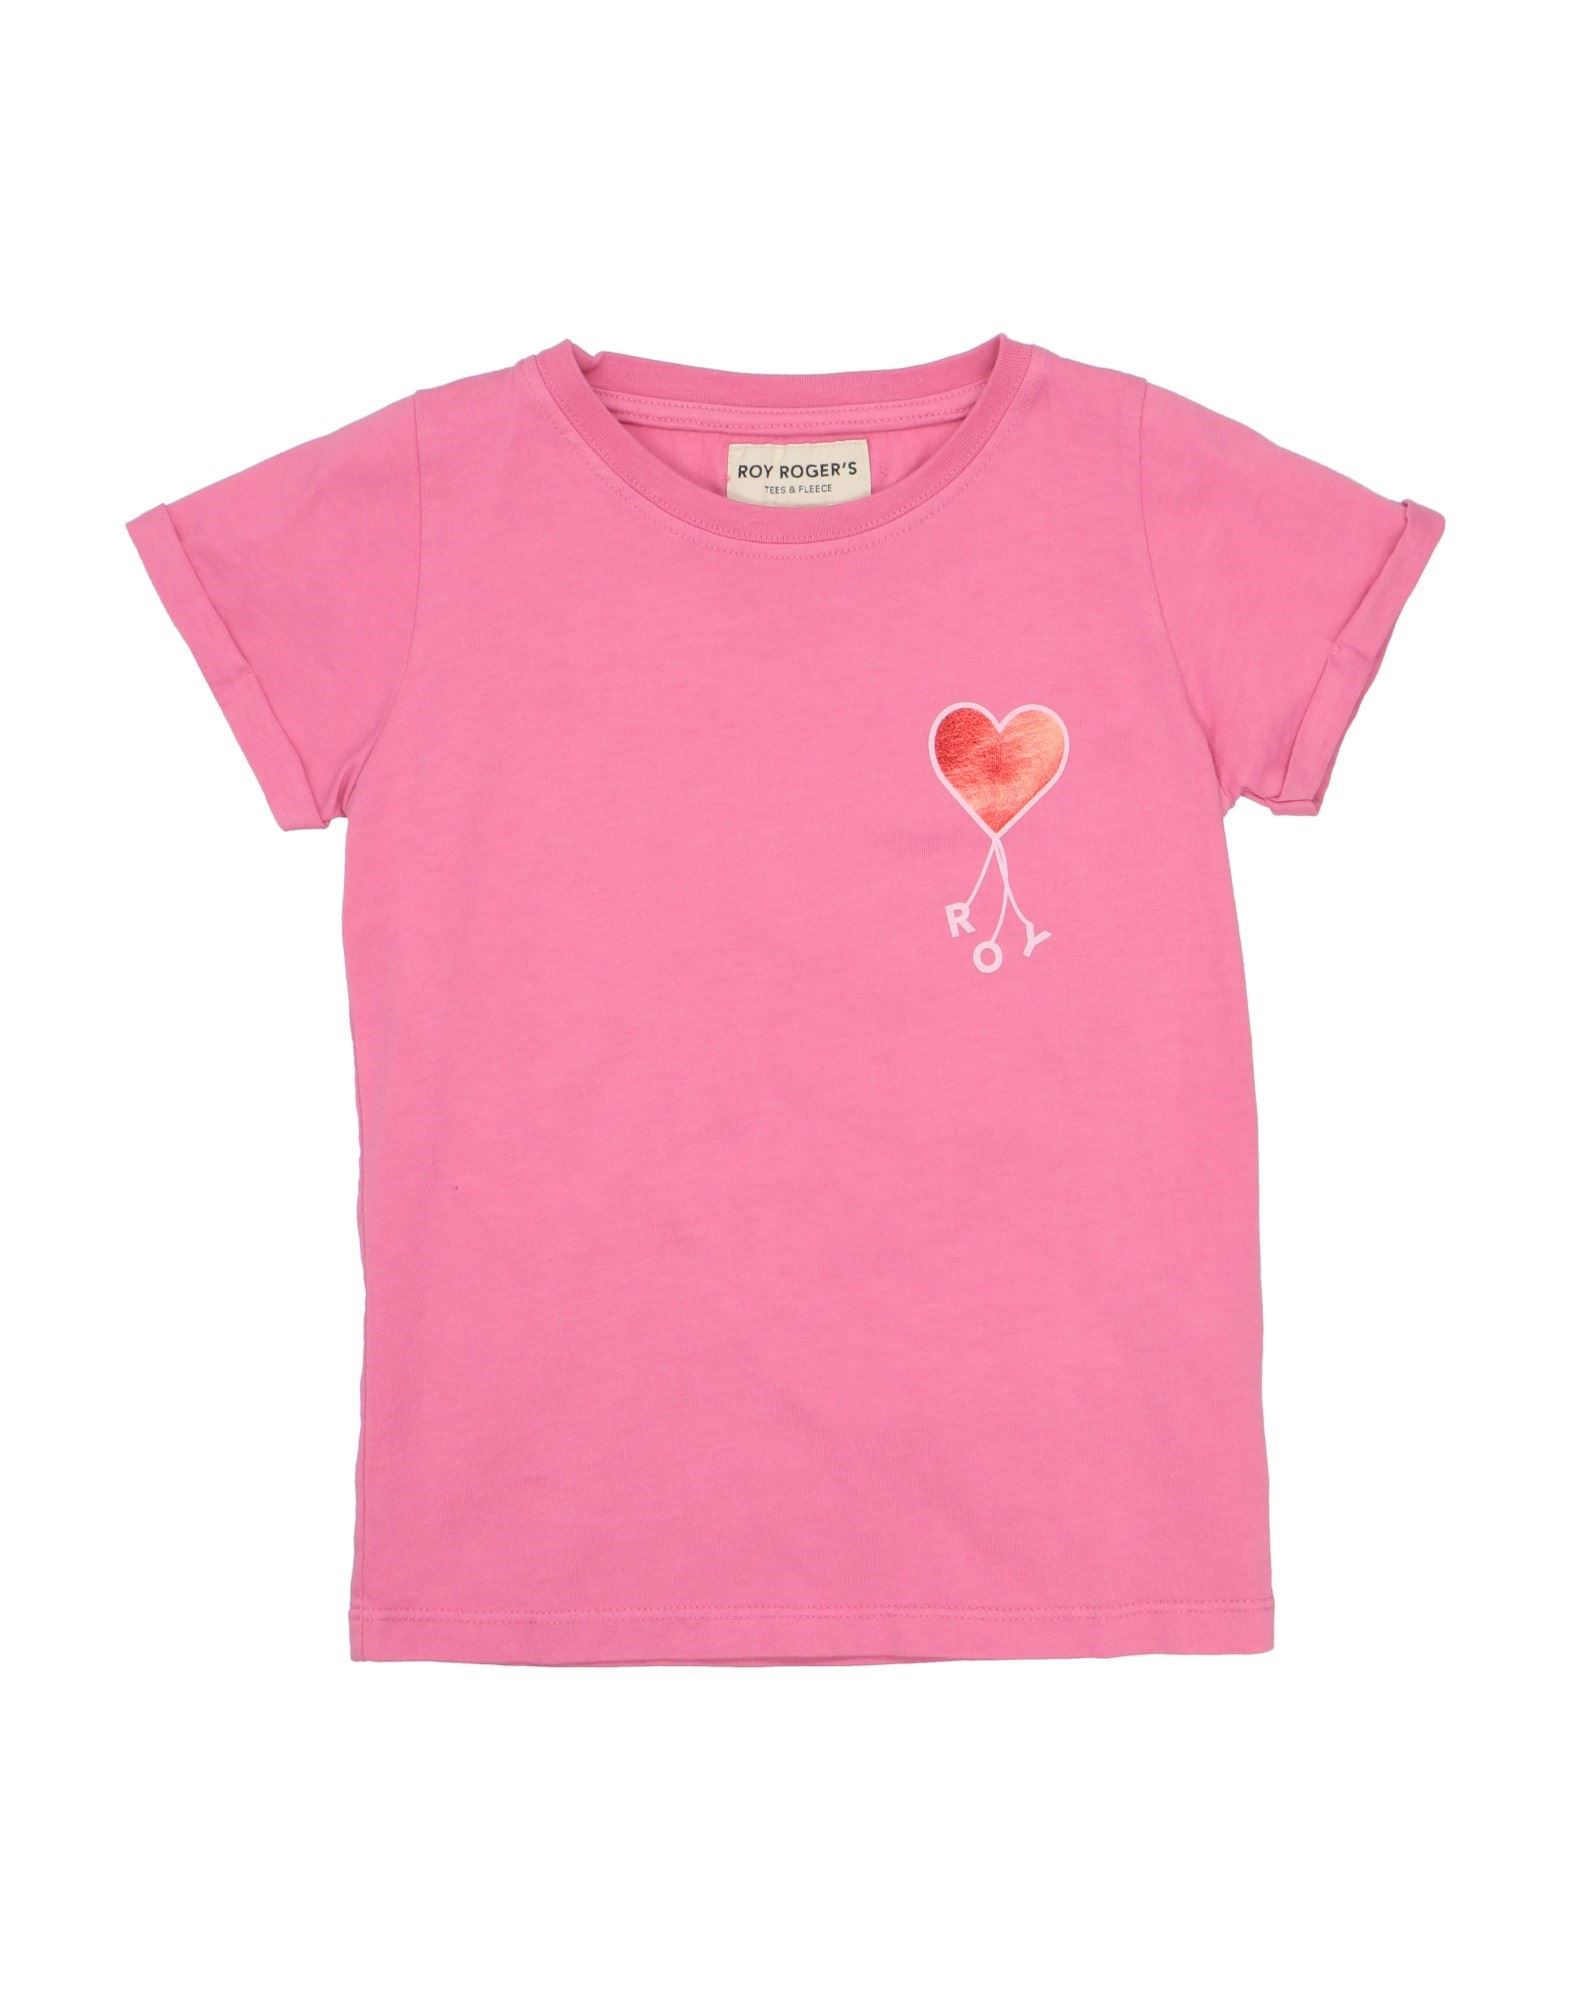 Roy Rogers Kids' Roÿ Roger's Toddler Girl T-shirt Fuchsia Size 6 Cotton In Pink